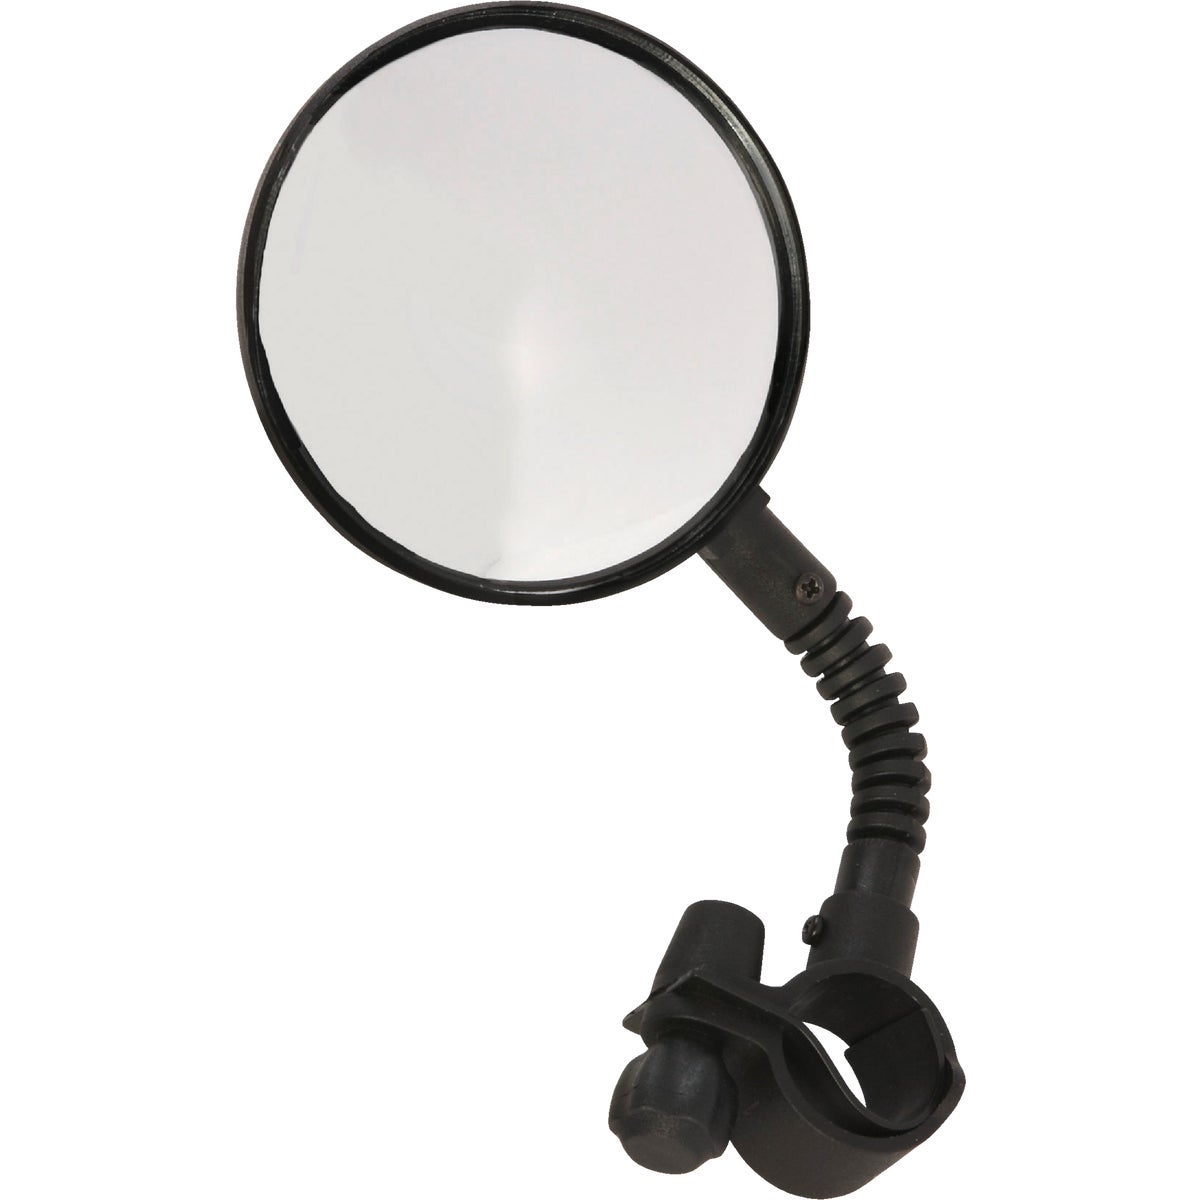 Bell Sports Cycle Products 7015989 Black Flexible Safety Mirror - image 1 of 2